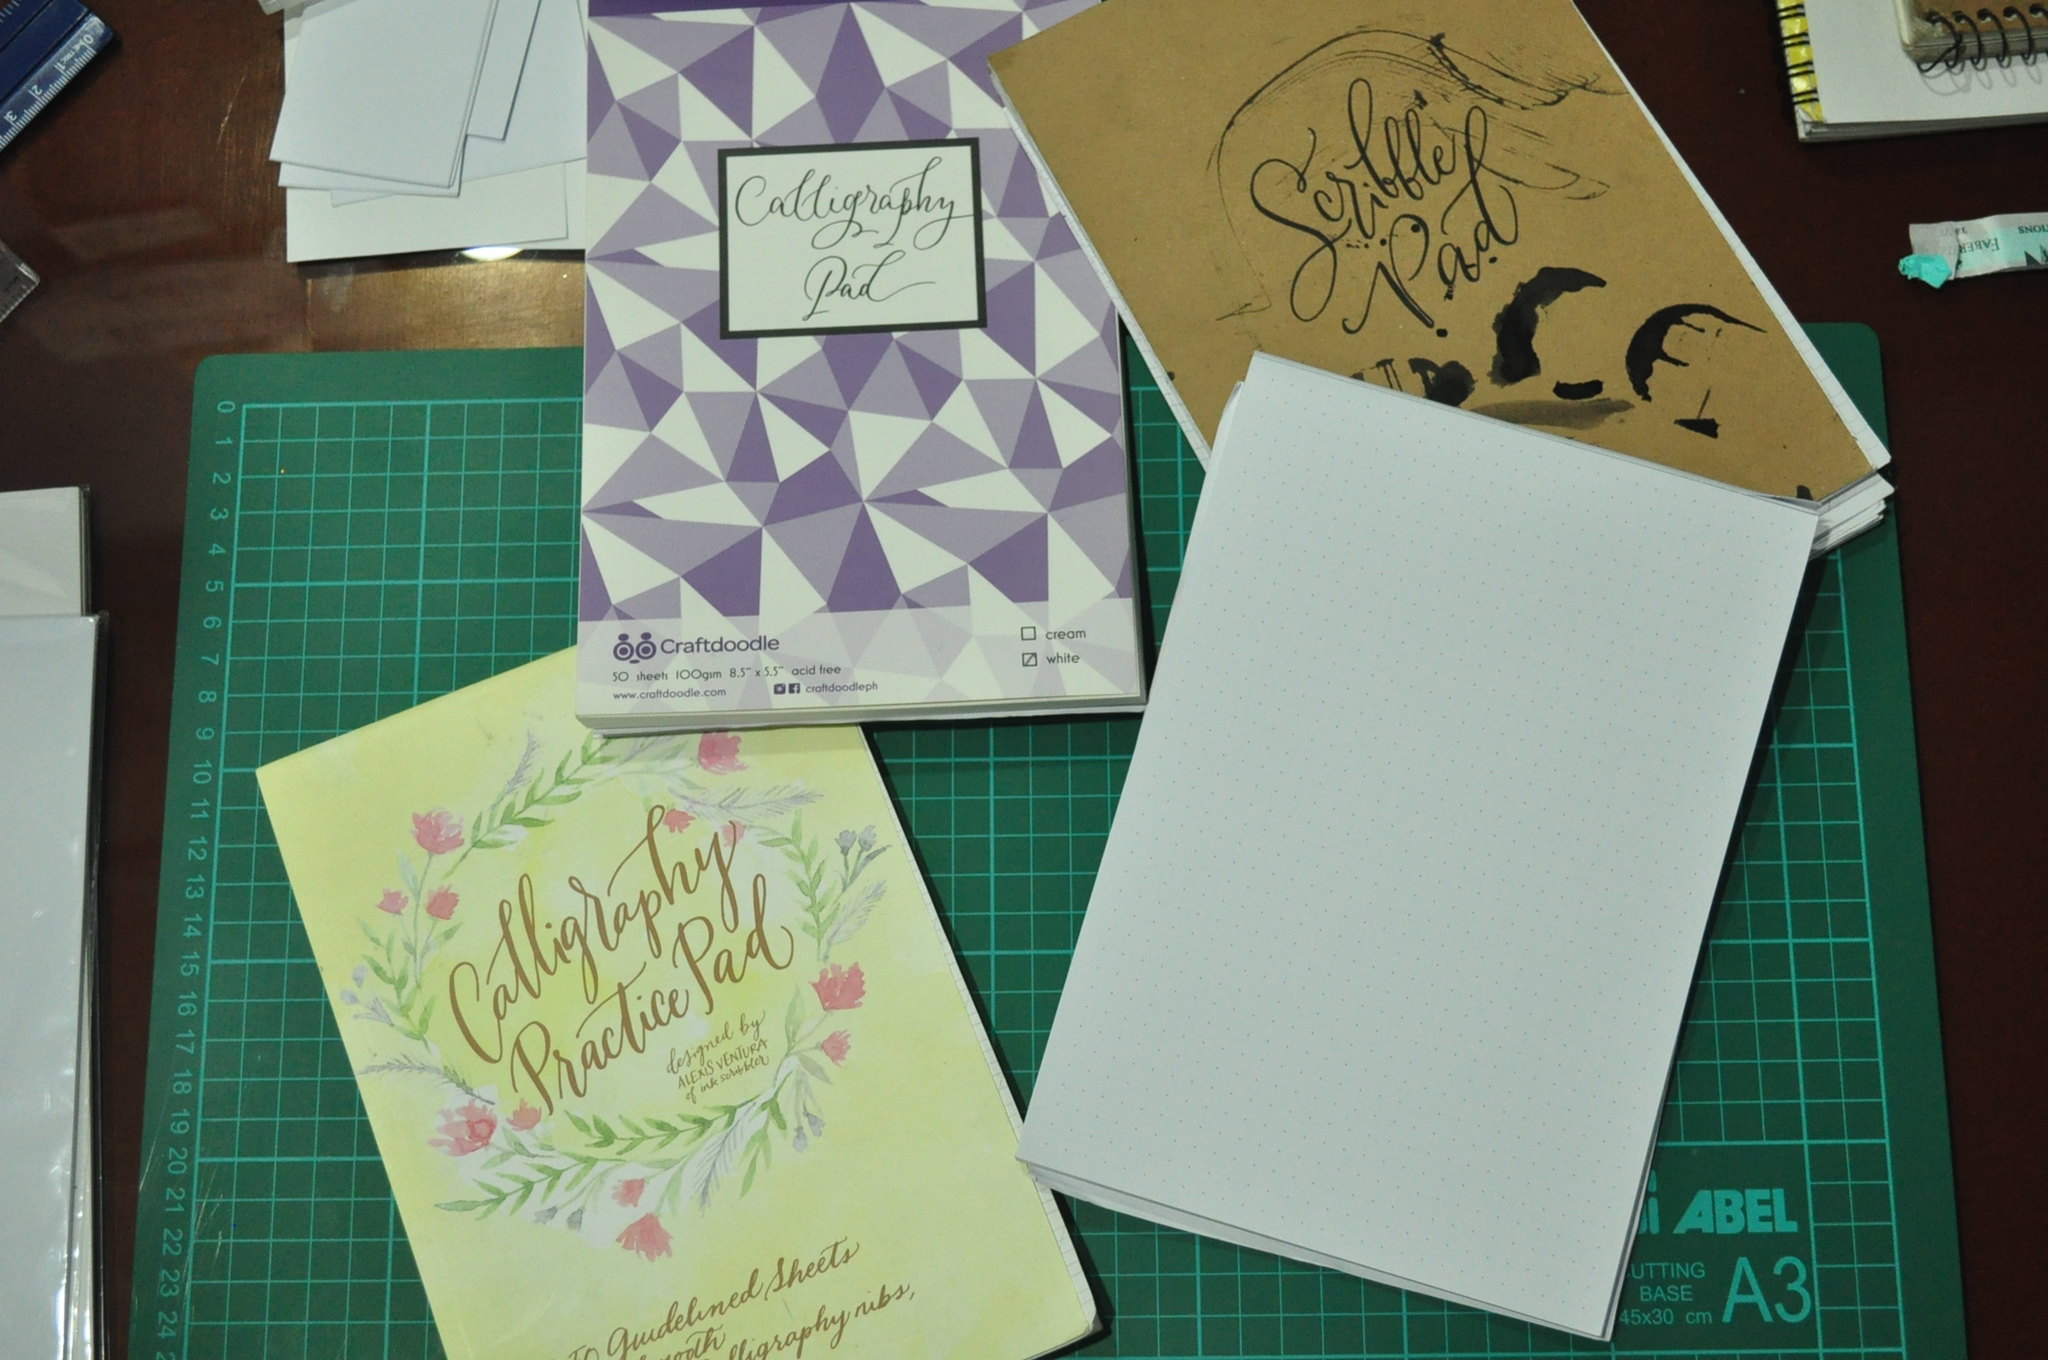 Calligraphy pads